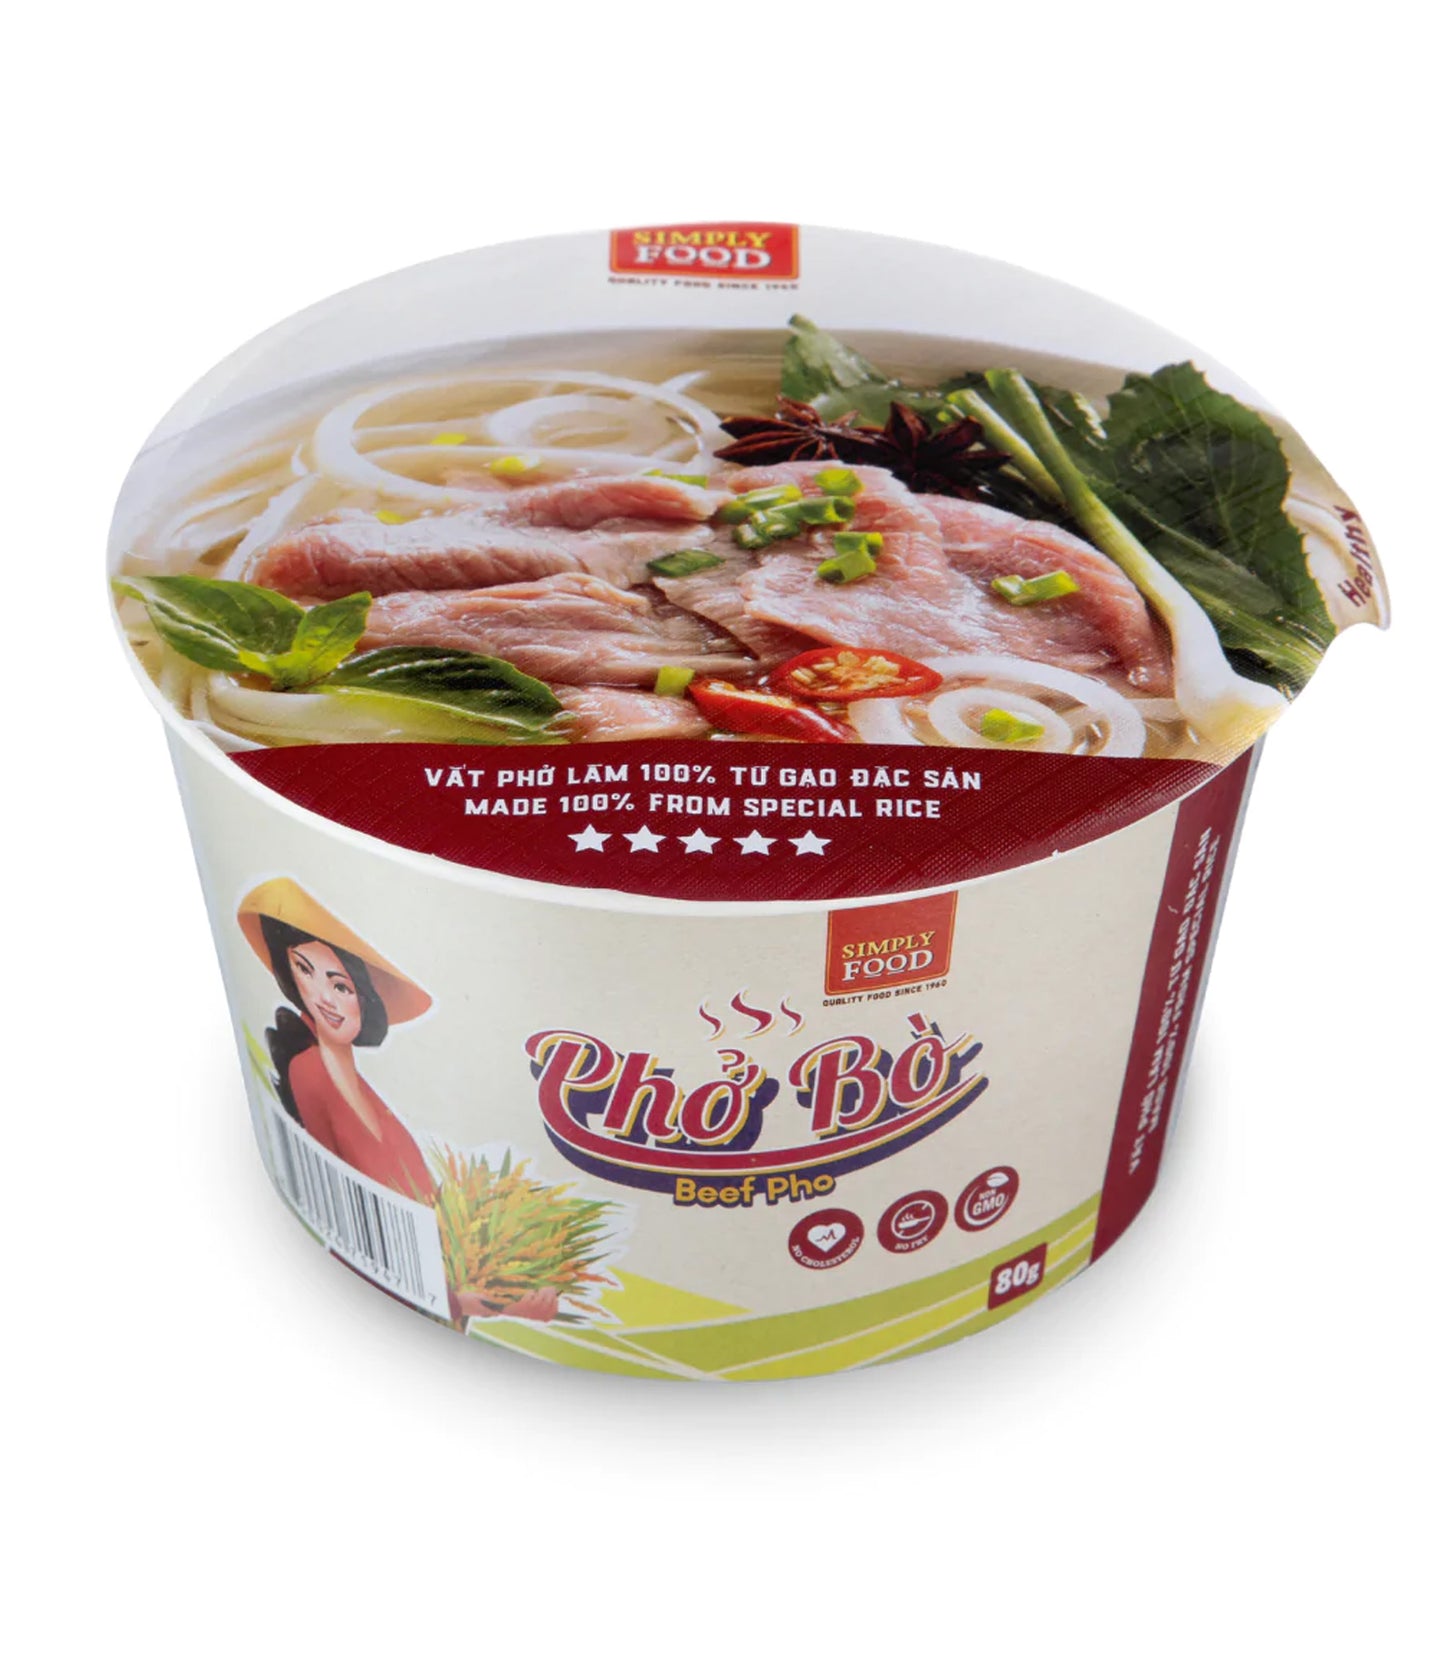 Simply Food – Beef Flavoured Instant Pho Noodle (Pho Bo) 80g